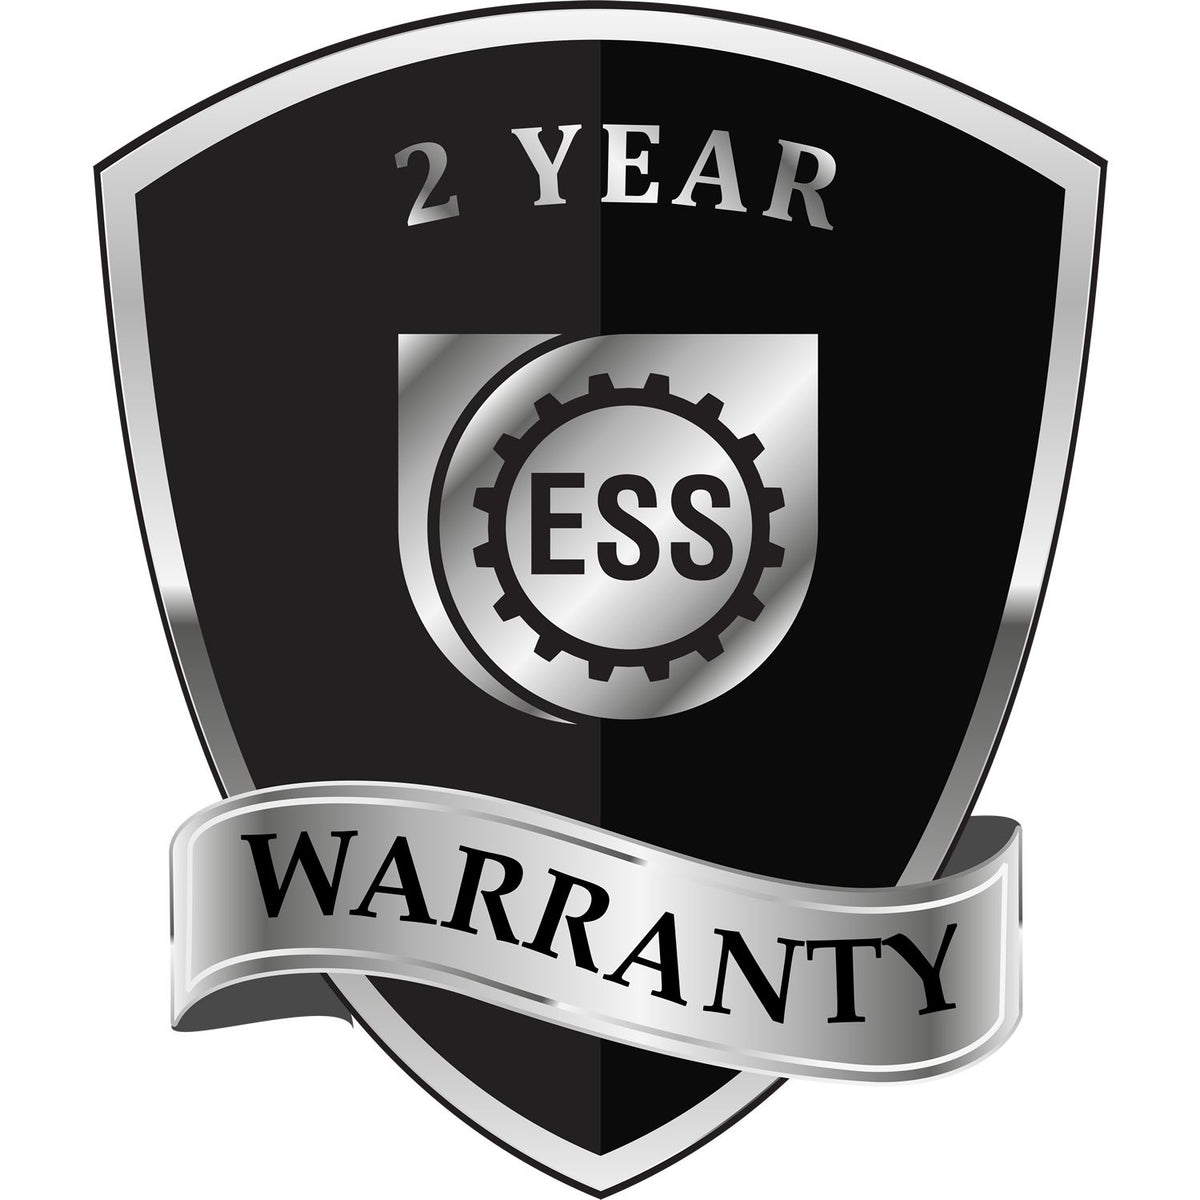 A black and silver badge or emblem showing warranty information for the Hybrid Wyoming Architect Seal